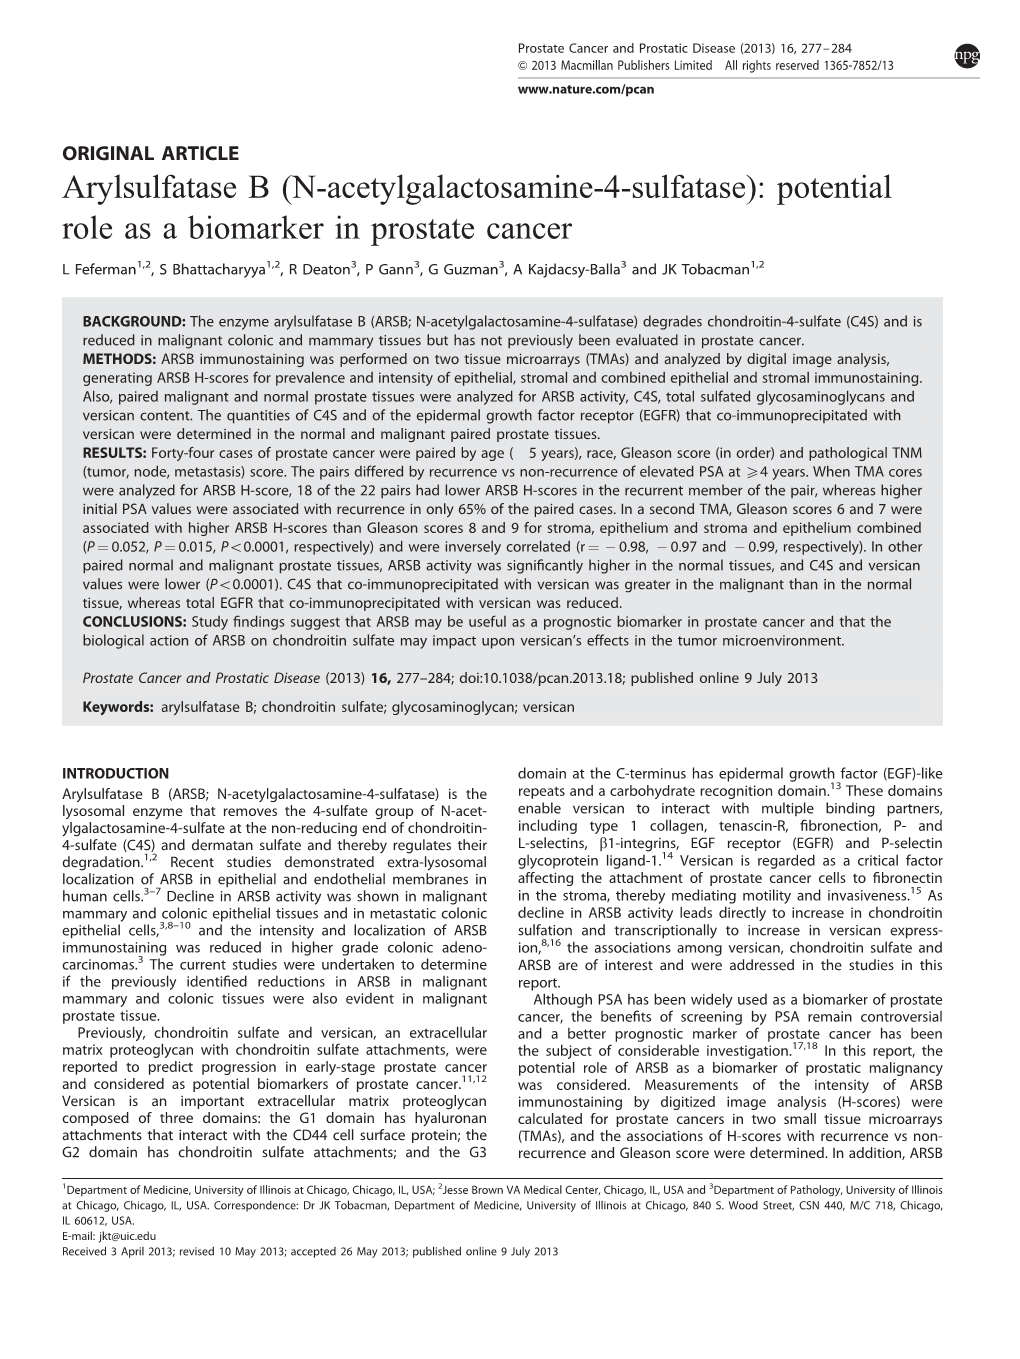 Potential Role As a Biomarker in Prostate Cancer